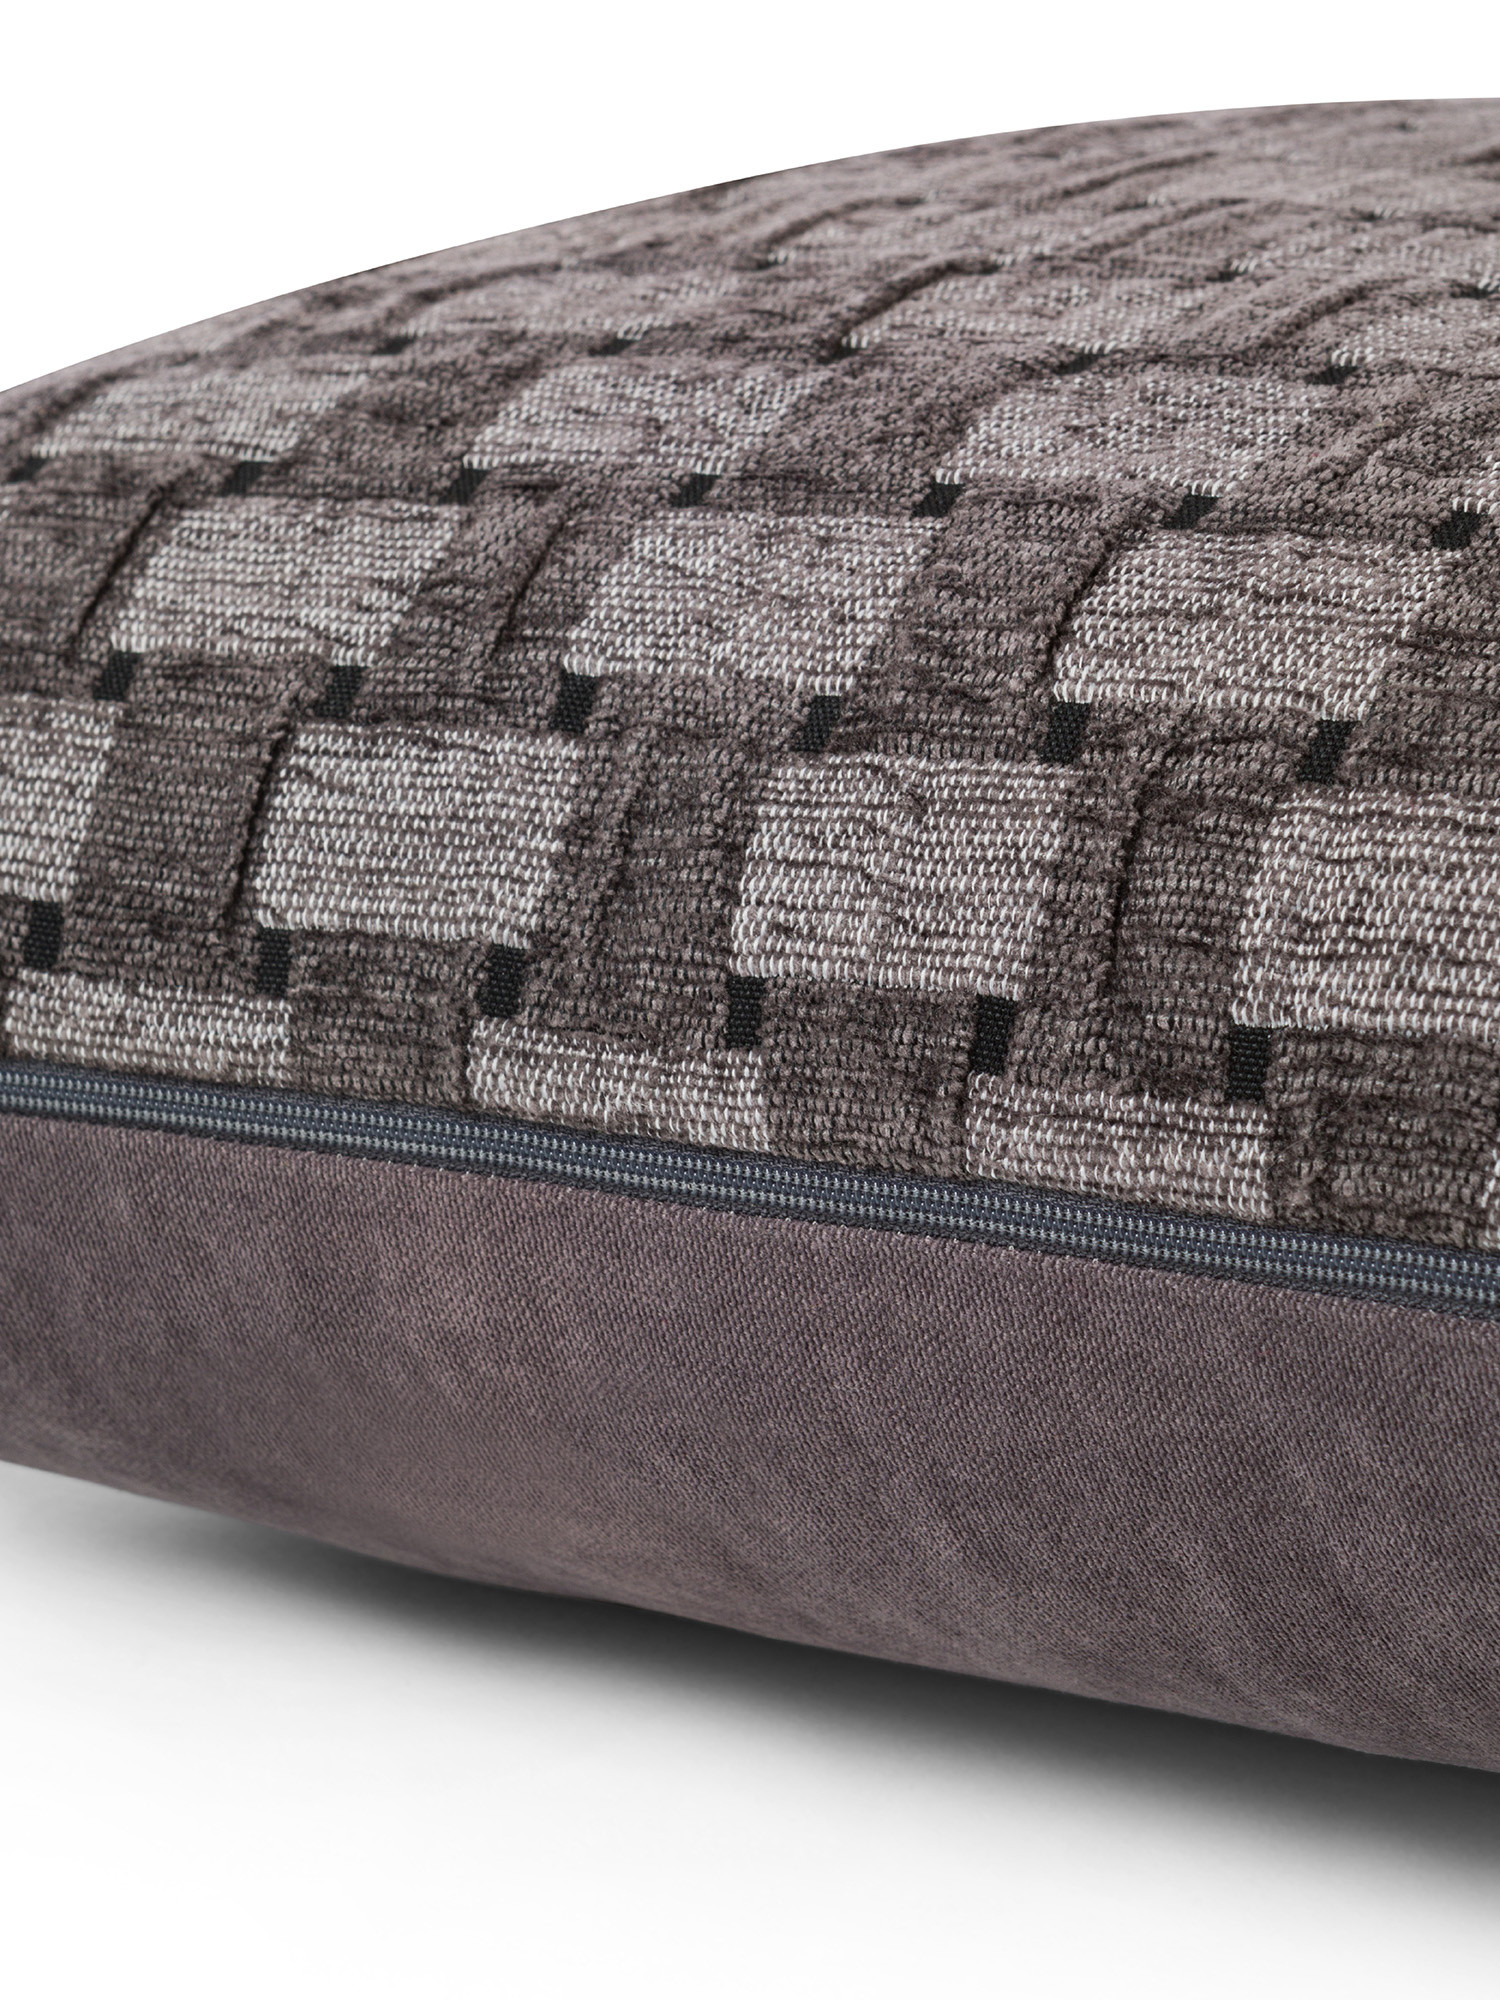 Jacquard cushion with woven pattern 45x45cm, Grey, large image number 2